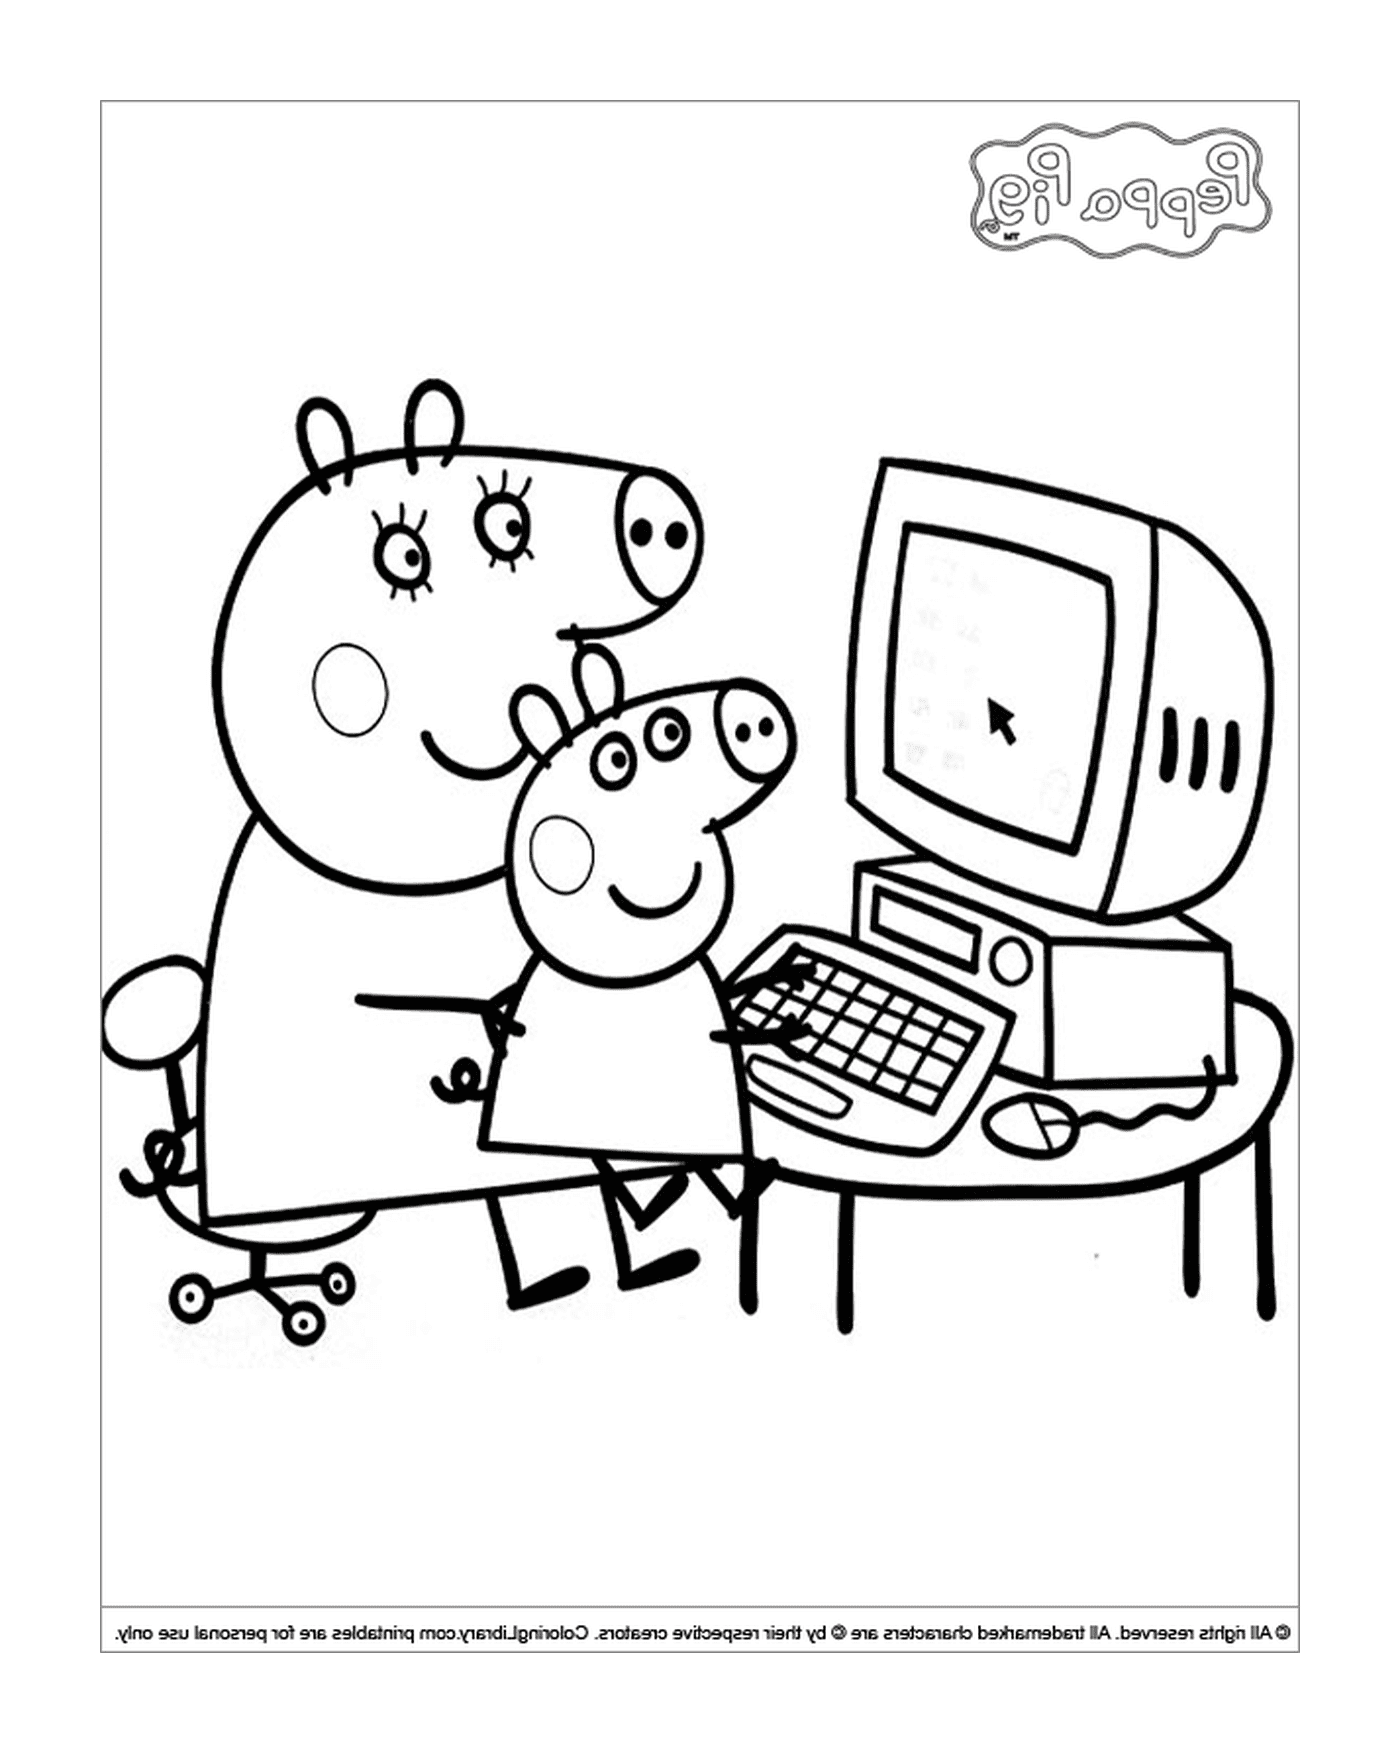  Peppa Pig and his father on the computer 